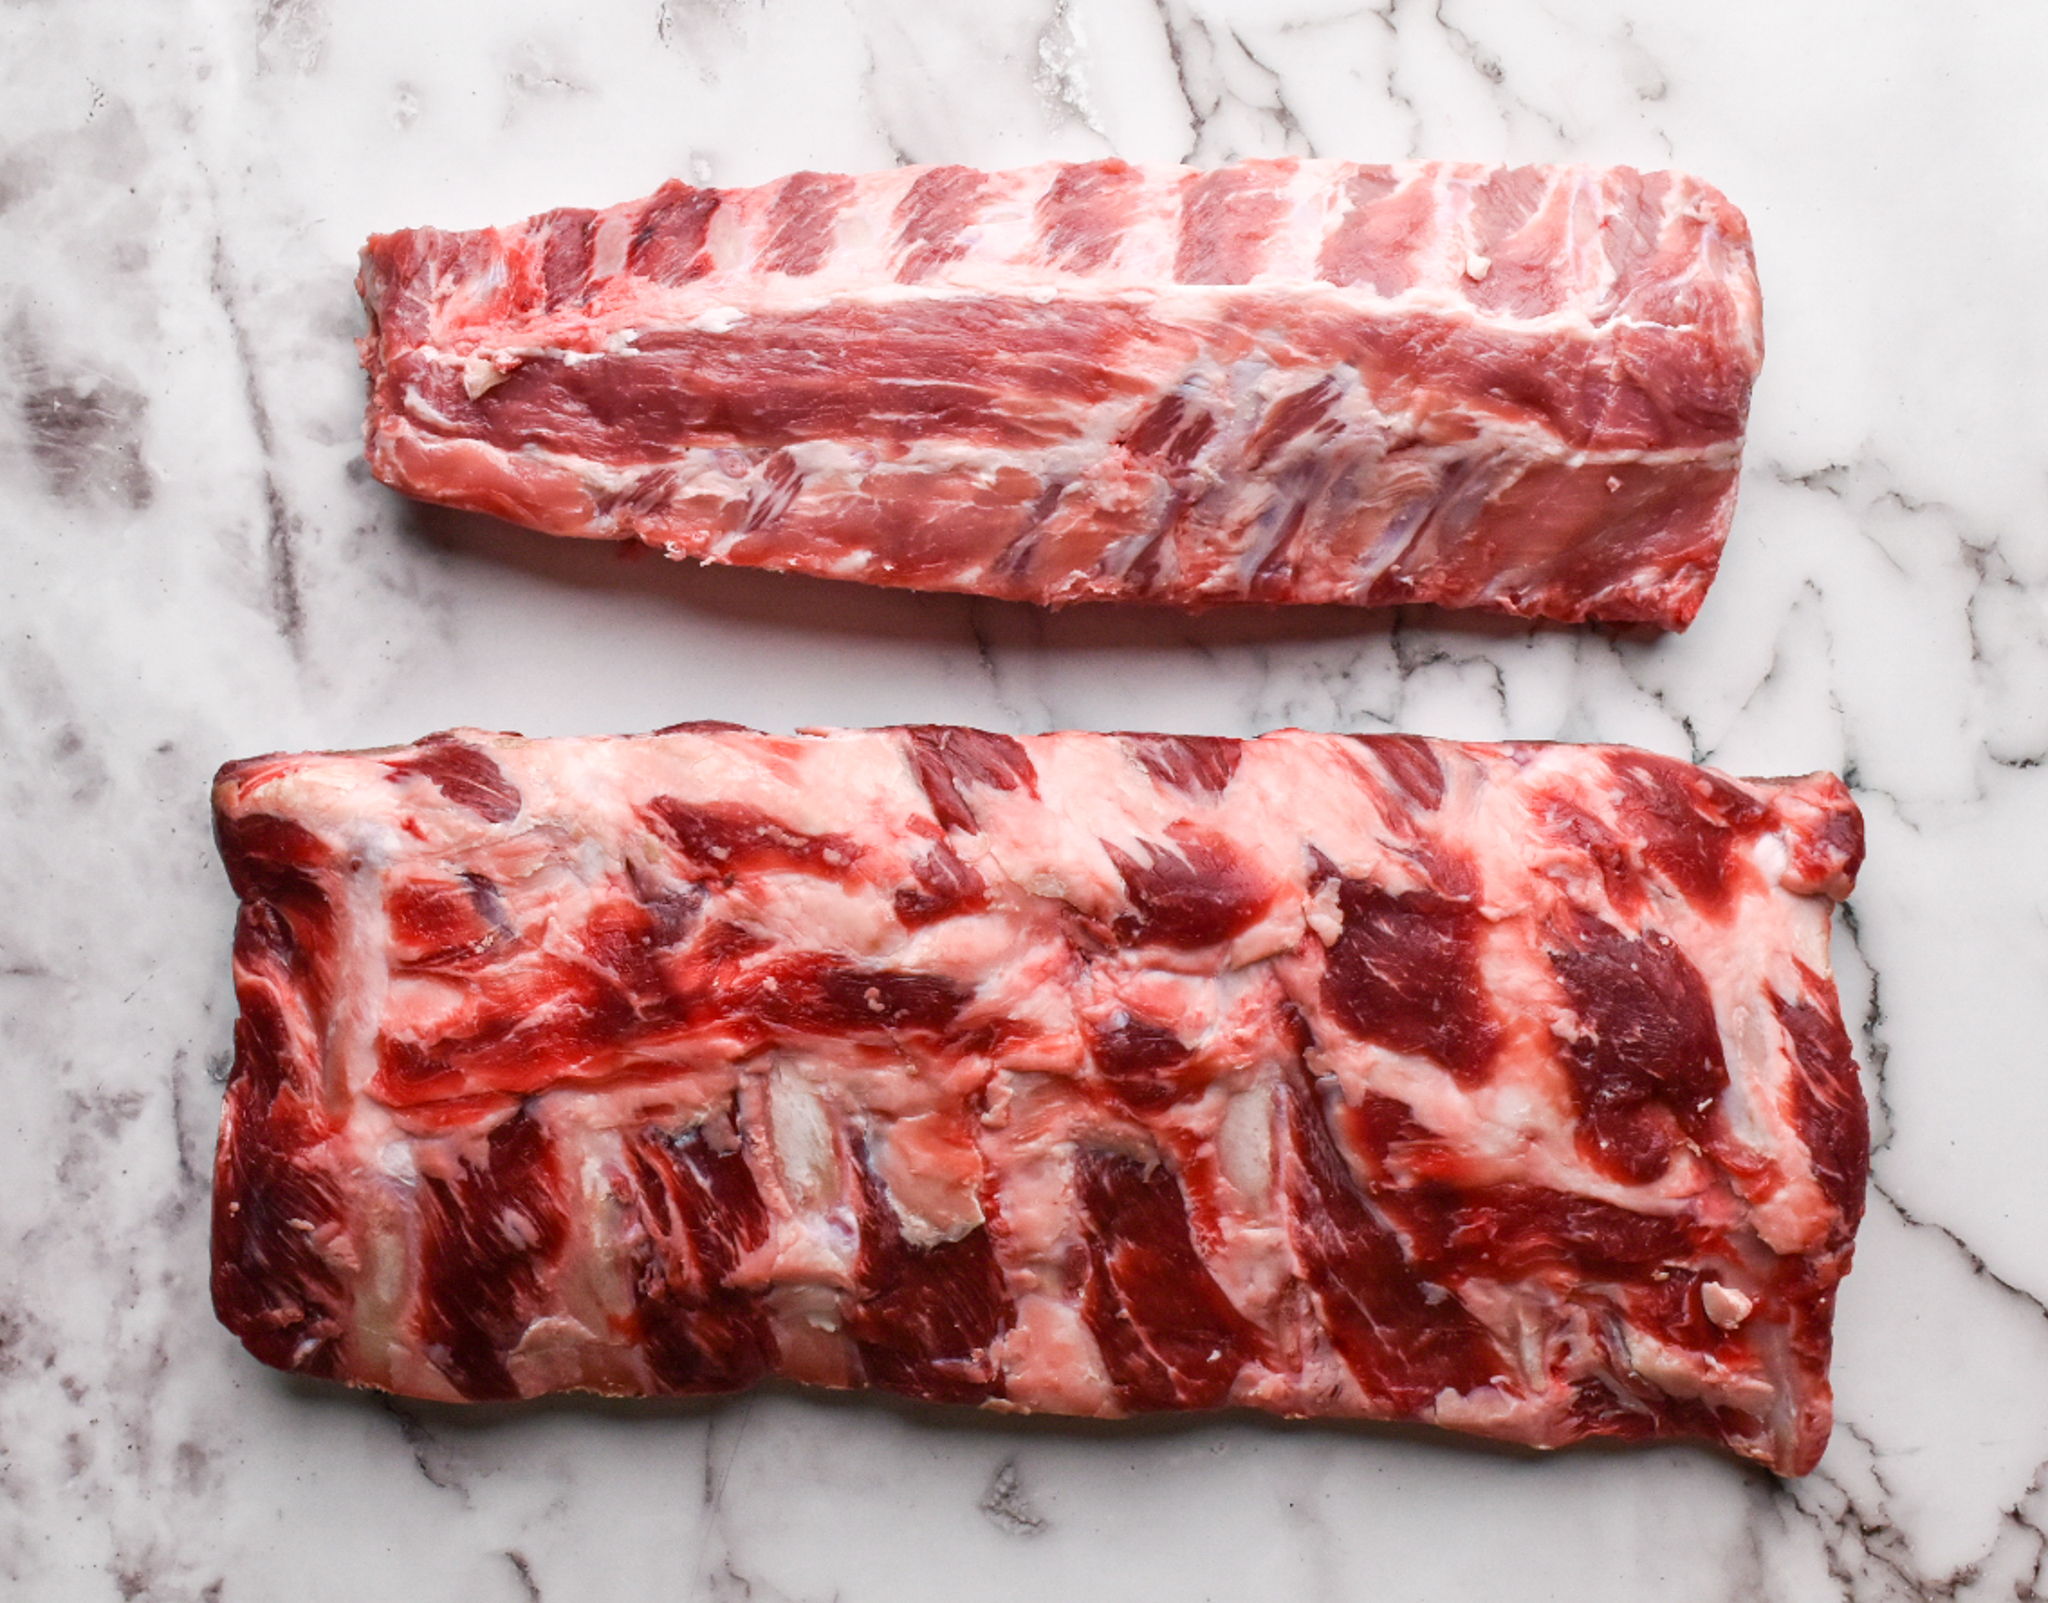 Types of Beef Ribs: Rib Revelations - Exploring Different Cuts of Beef Ribs